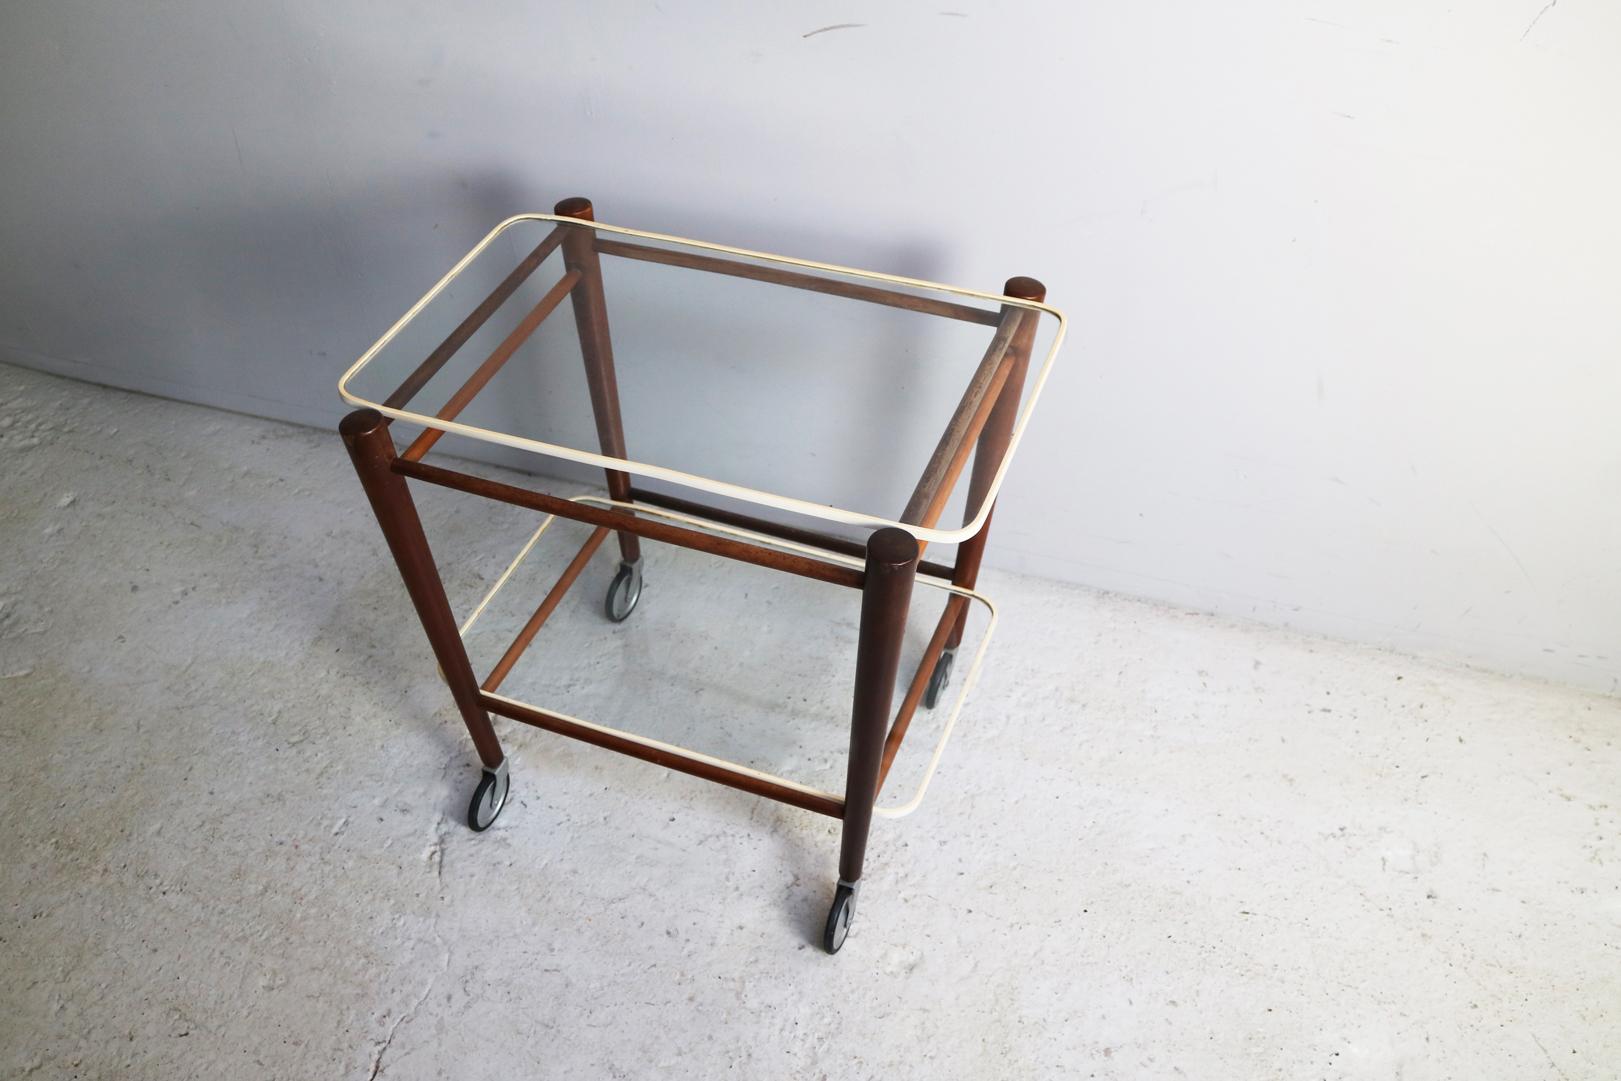 A beautiful serving trolley in its original state by renowned Dutch designer Cees Braakman and produced by UMS Pastoe in the 1950s.

The trolley has a solid teak frame and two un-fixed glass shelves with the original rubber edge protection. The